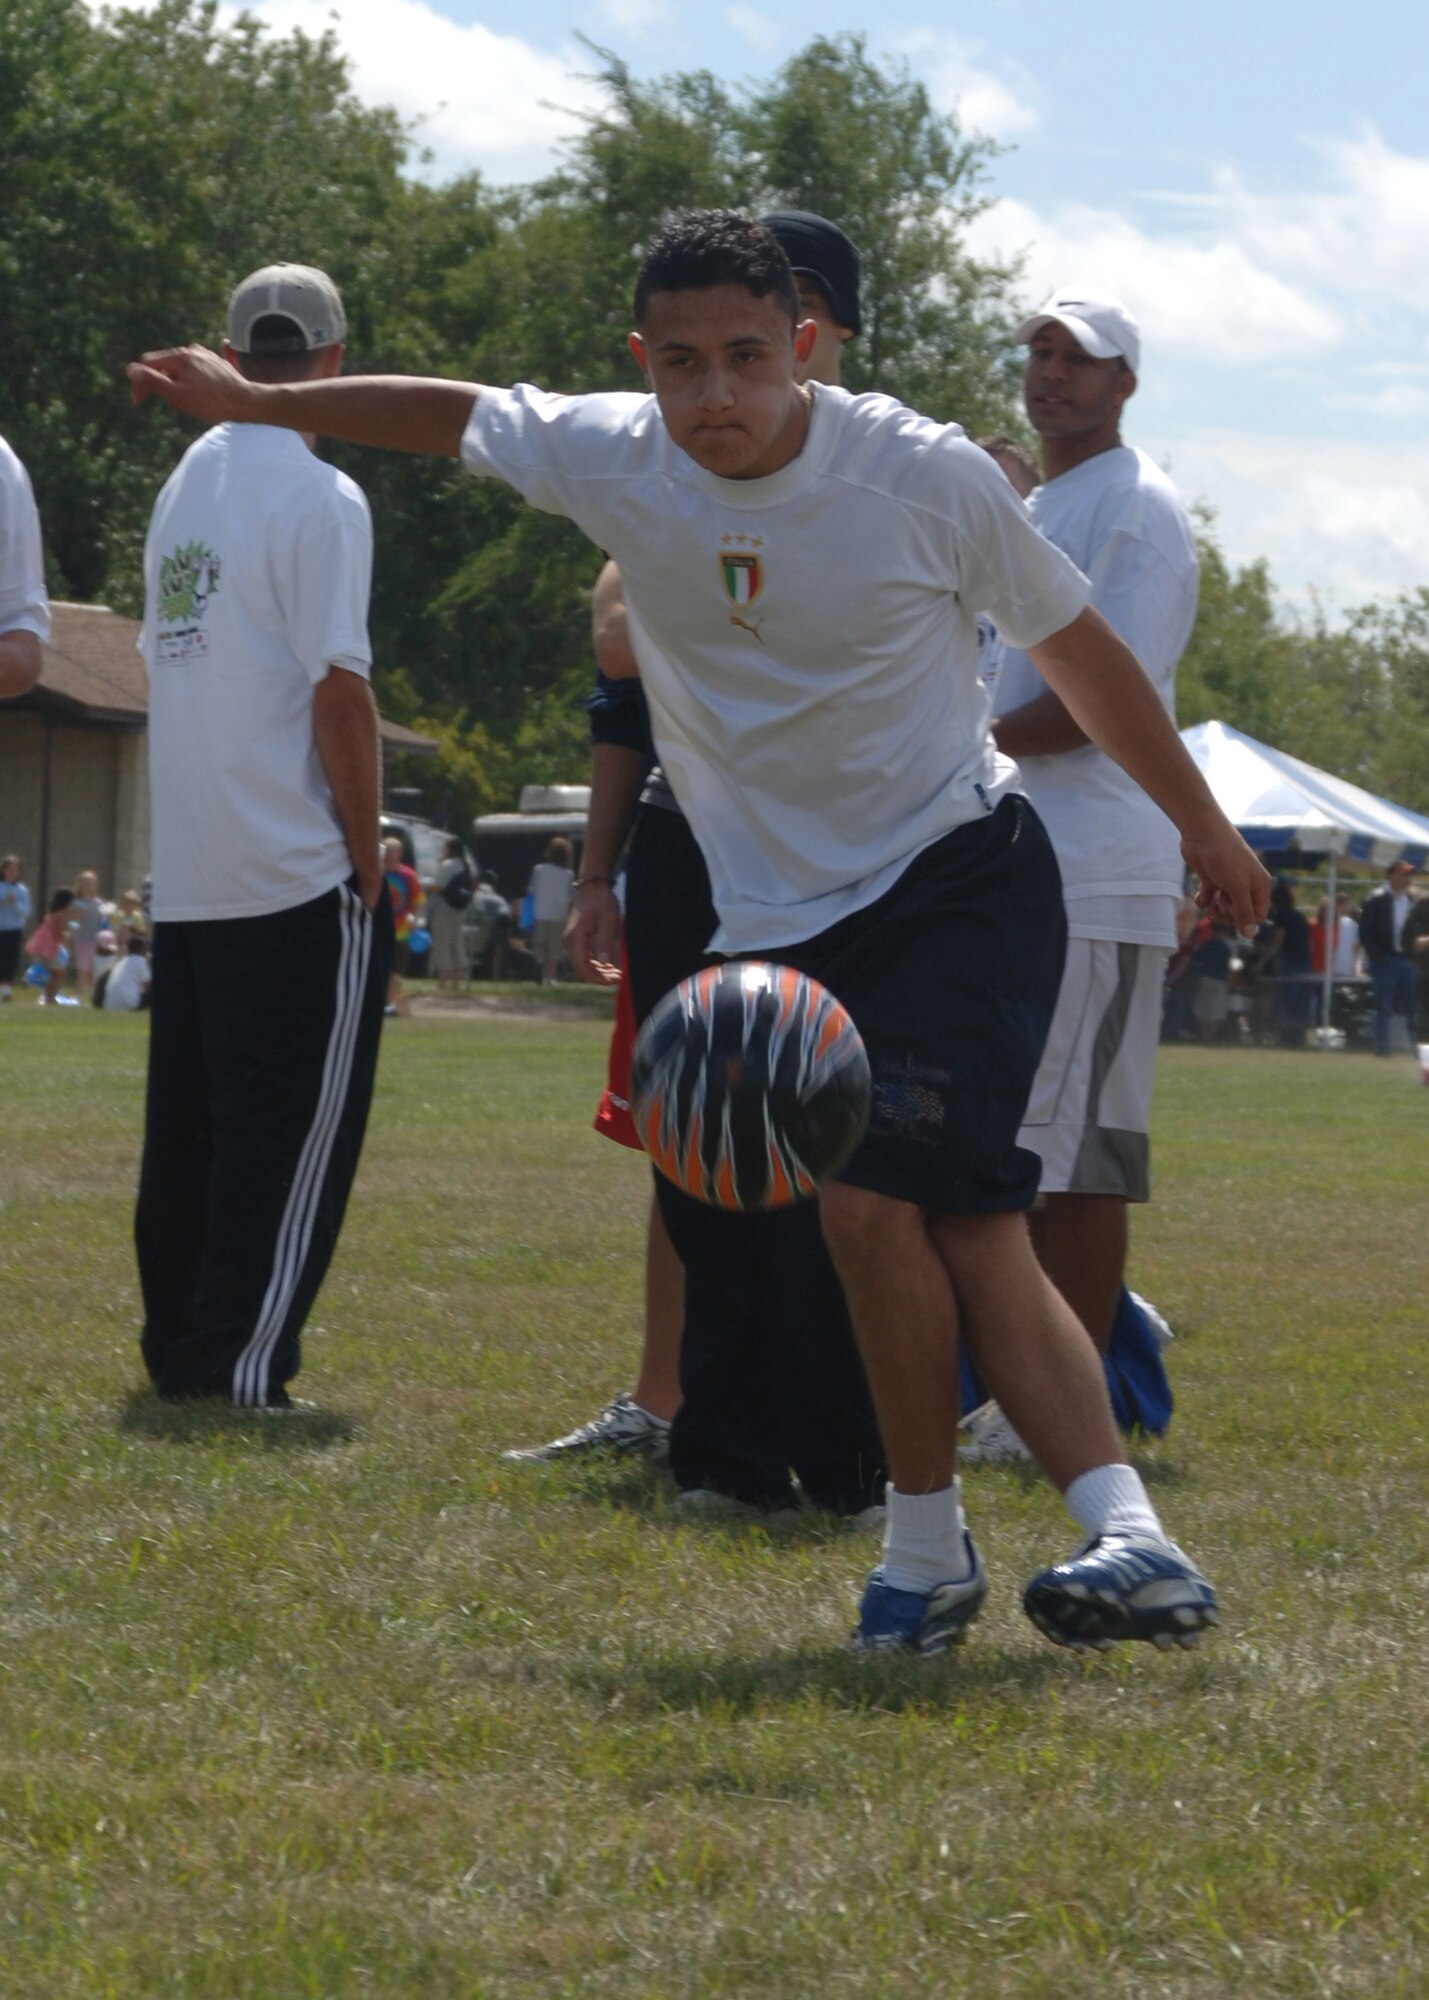 GRAND FORKS AFB, ND-- Airman Diego Cardona, 319th Logistics Readiness Squadron, boots a soccer ball while competing in the soccer kick contest during the 2007 Summer Bash here. Summer Bash is the wing's annual picnic, celebrating summer, sports and family. (USAF Photo/Staff Sgt Suellyn Nuckolls)